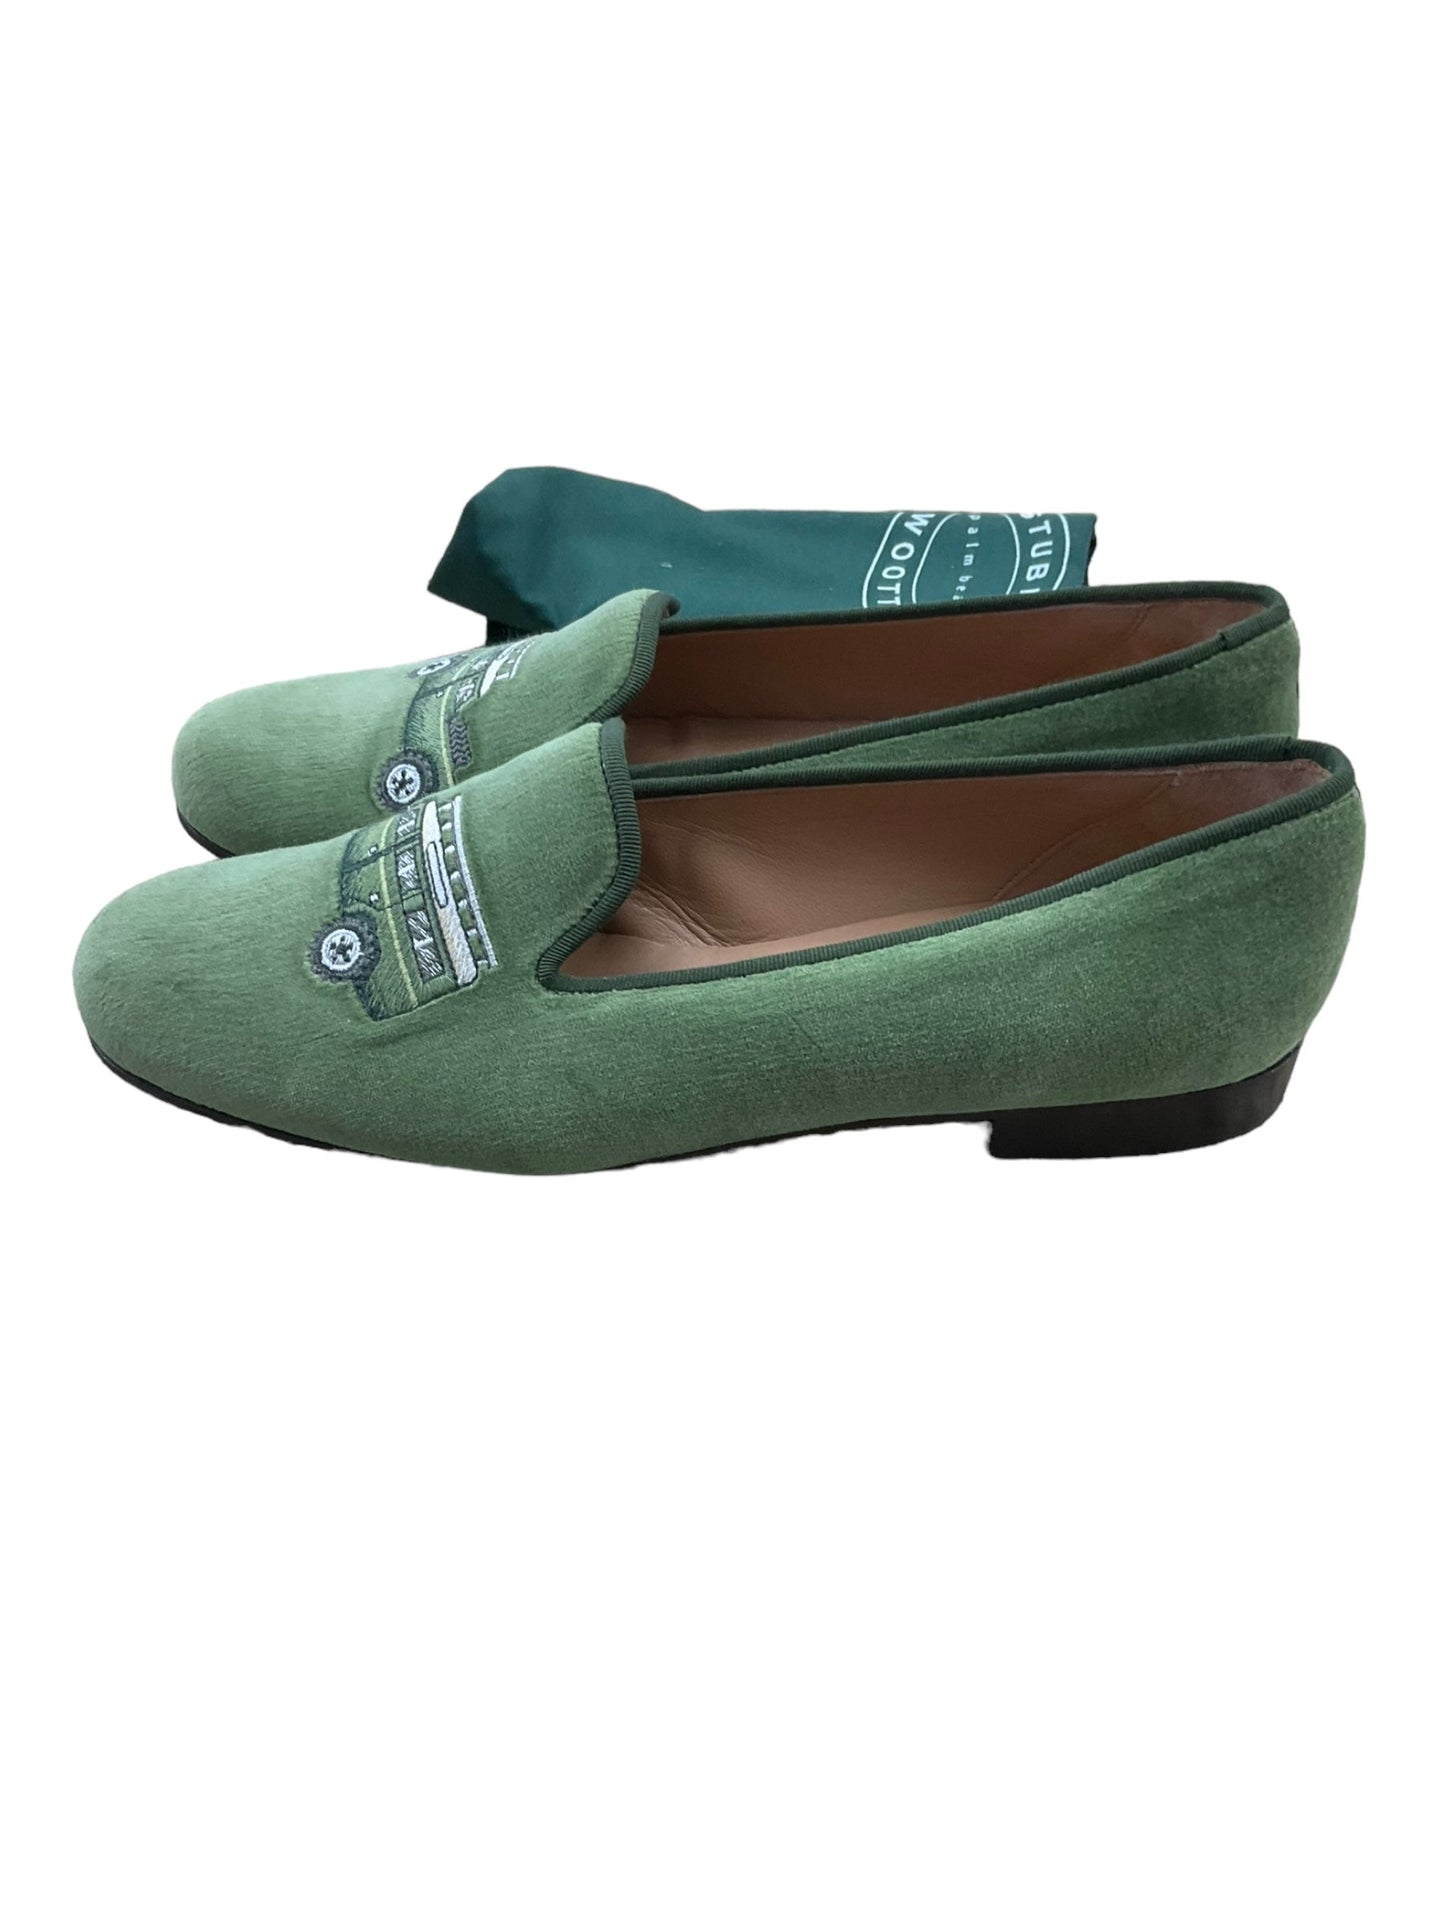 Green Shoes Flats Clothes Mentor, Size 10.5